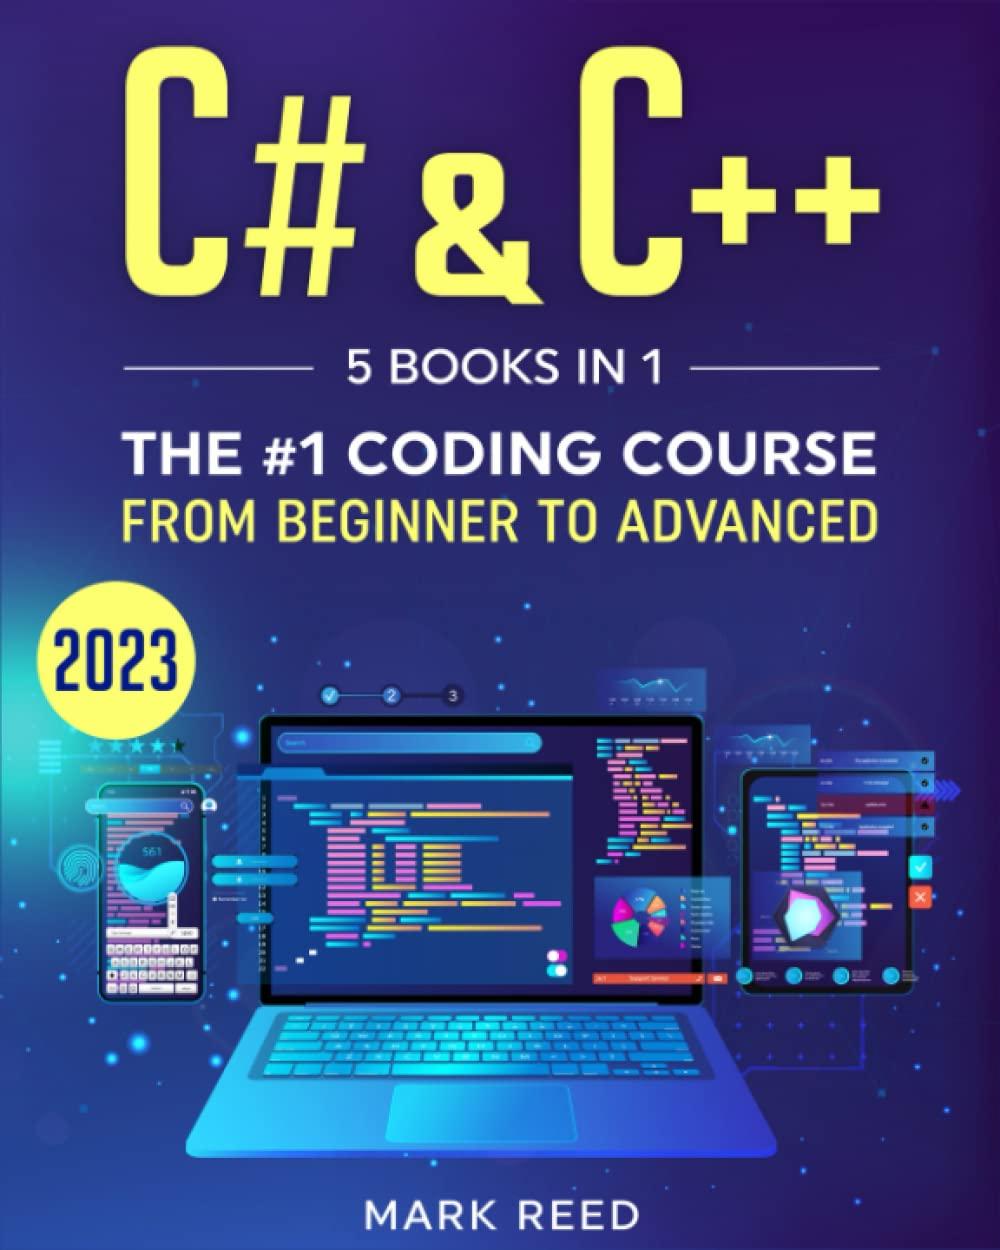 C# And C++ 5 Books In 1 The #1 Coding Course From Beginner To Advanced